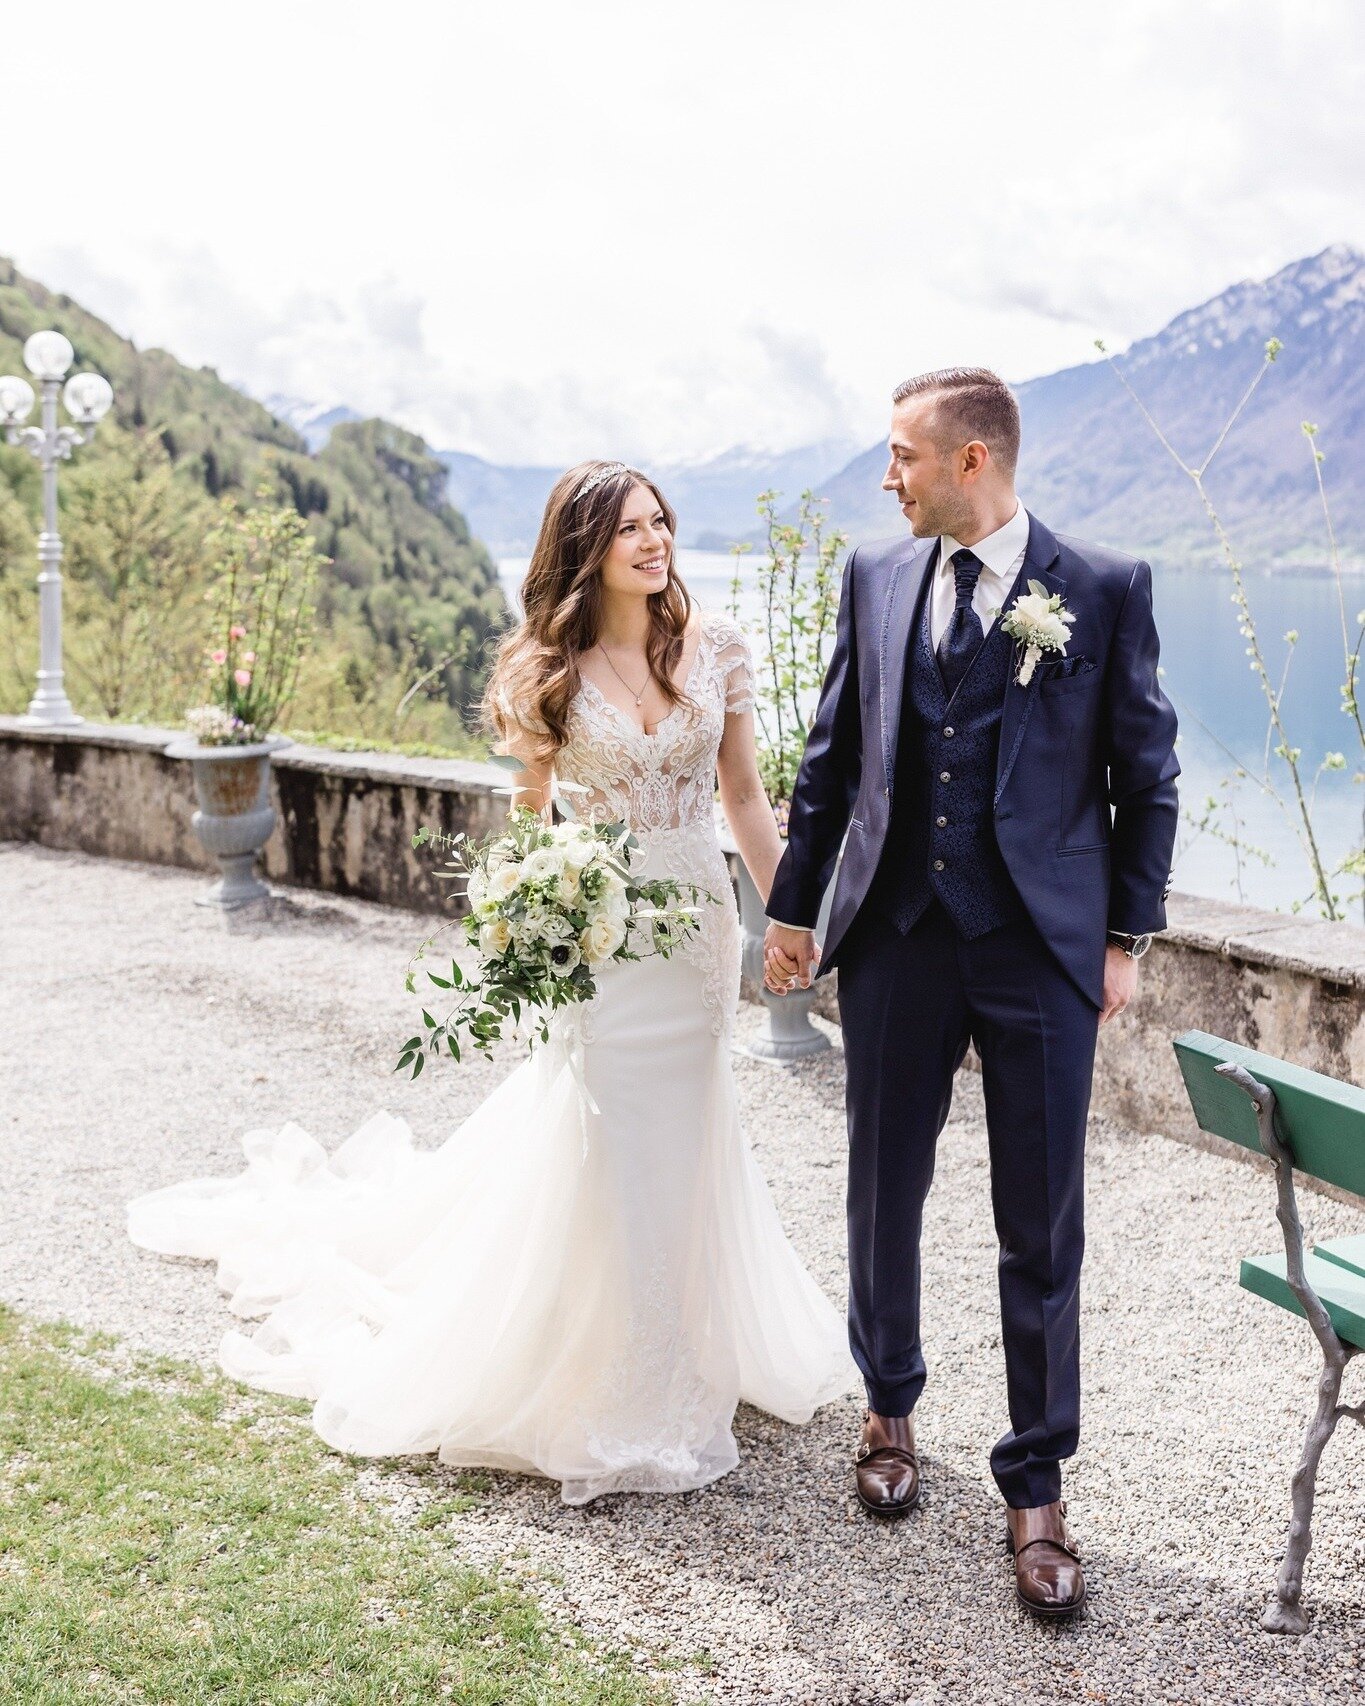 This past weekend, my wedding season 2023 finally kicked off with this stunner of a wedding! Christine and Nicolas said YES on an incredible spring day with breathtaking views over Lake Brienz and I couldn't have wished for a more perfect wedding to 